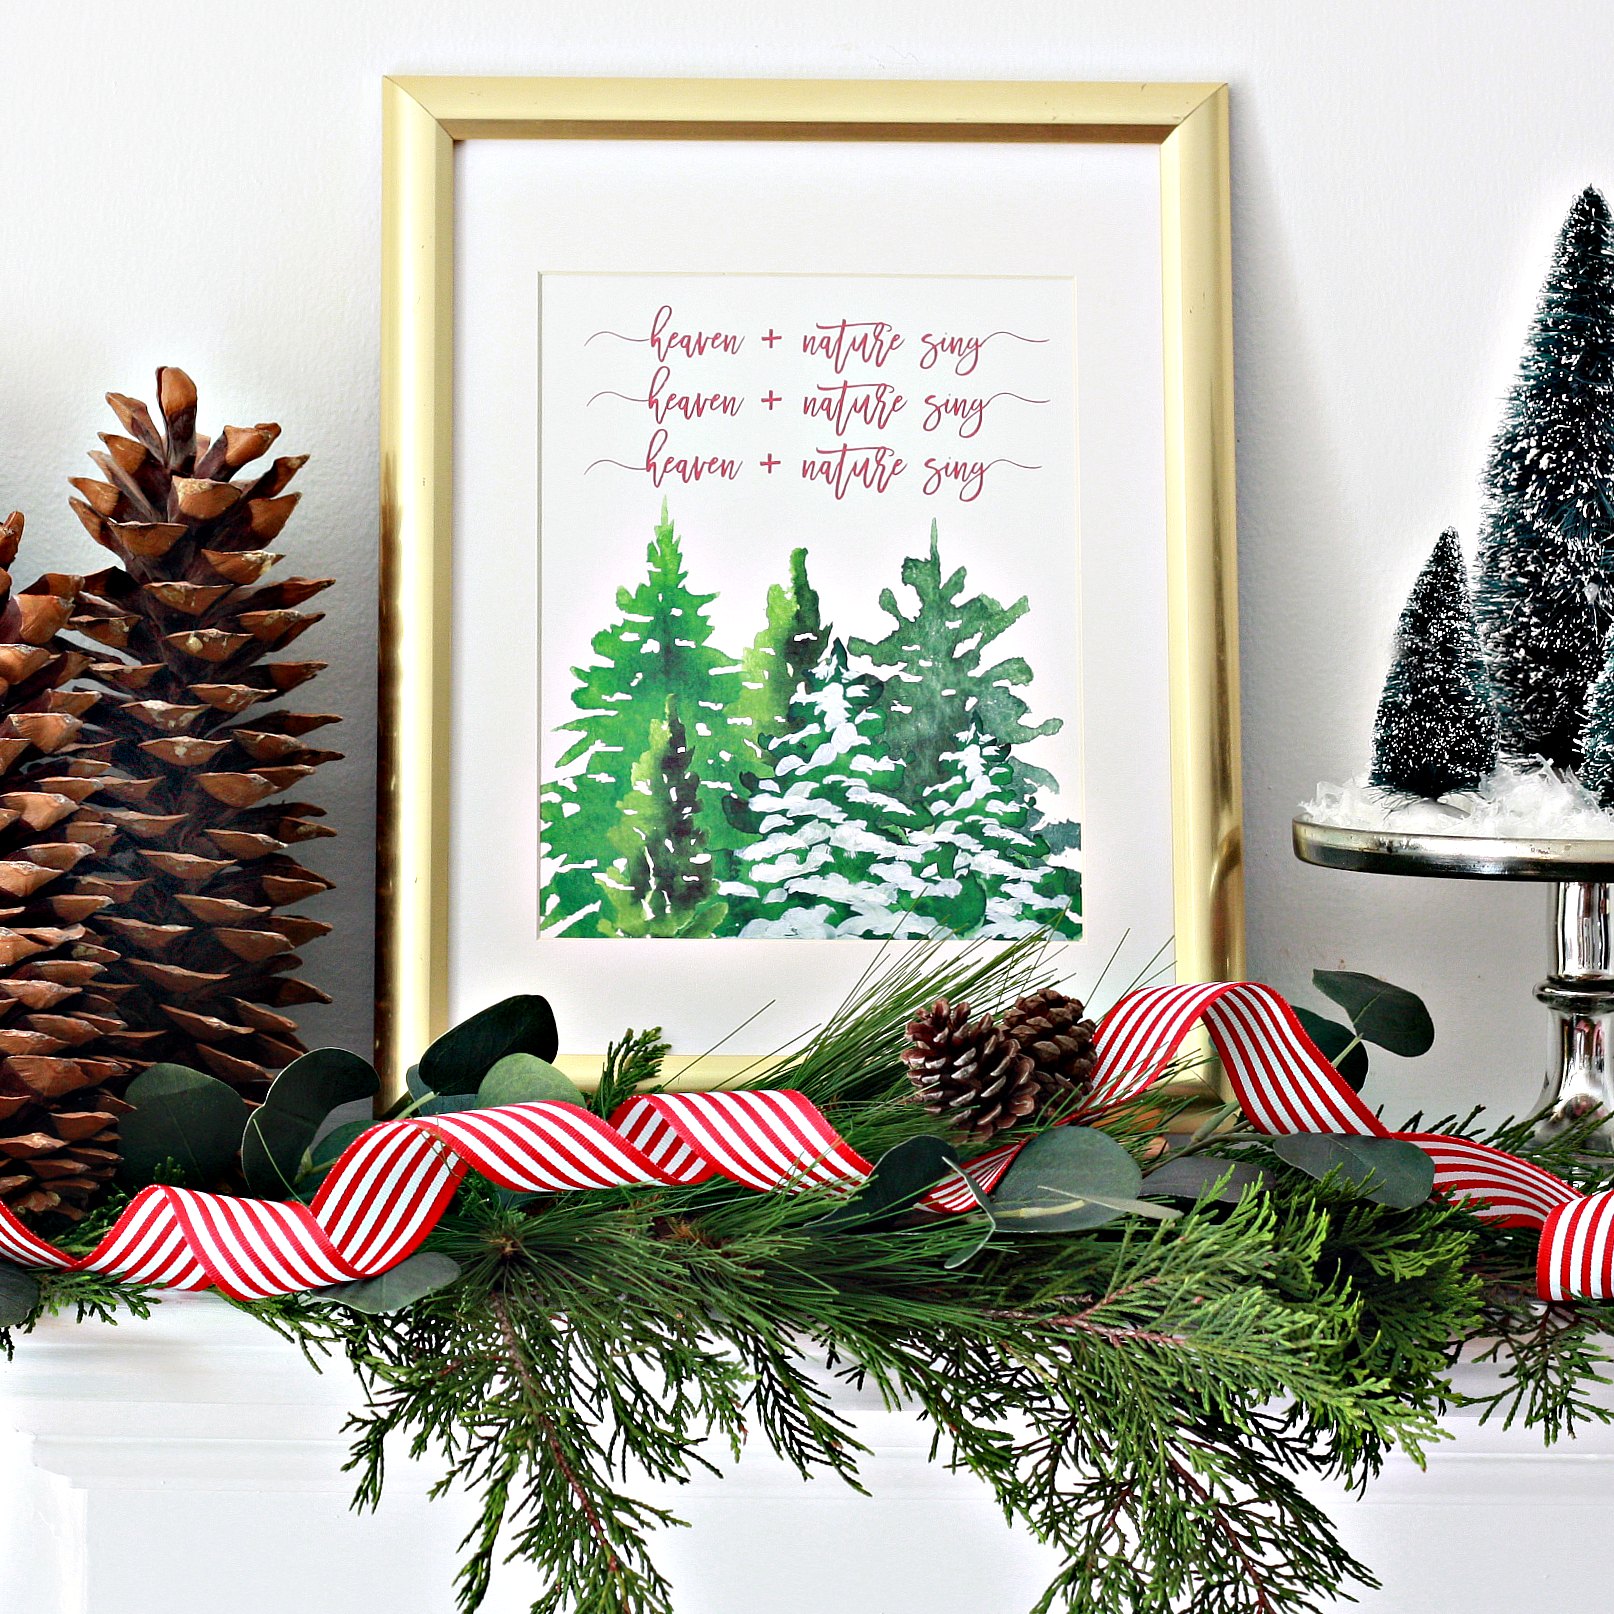 Christmas printables are such an affordable and easy way to add Christmas decor to your home. These Christmas printables are the absolute best of the best!